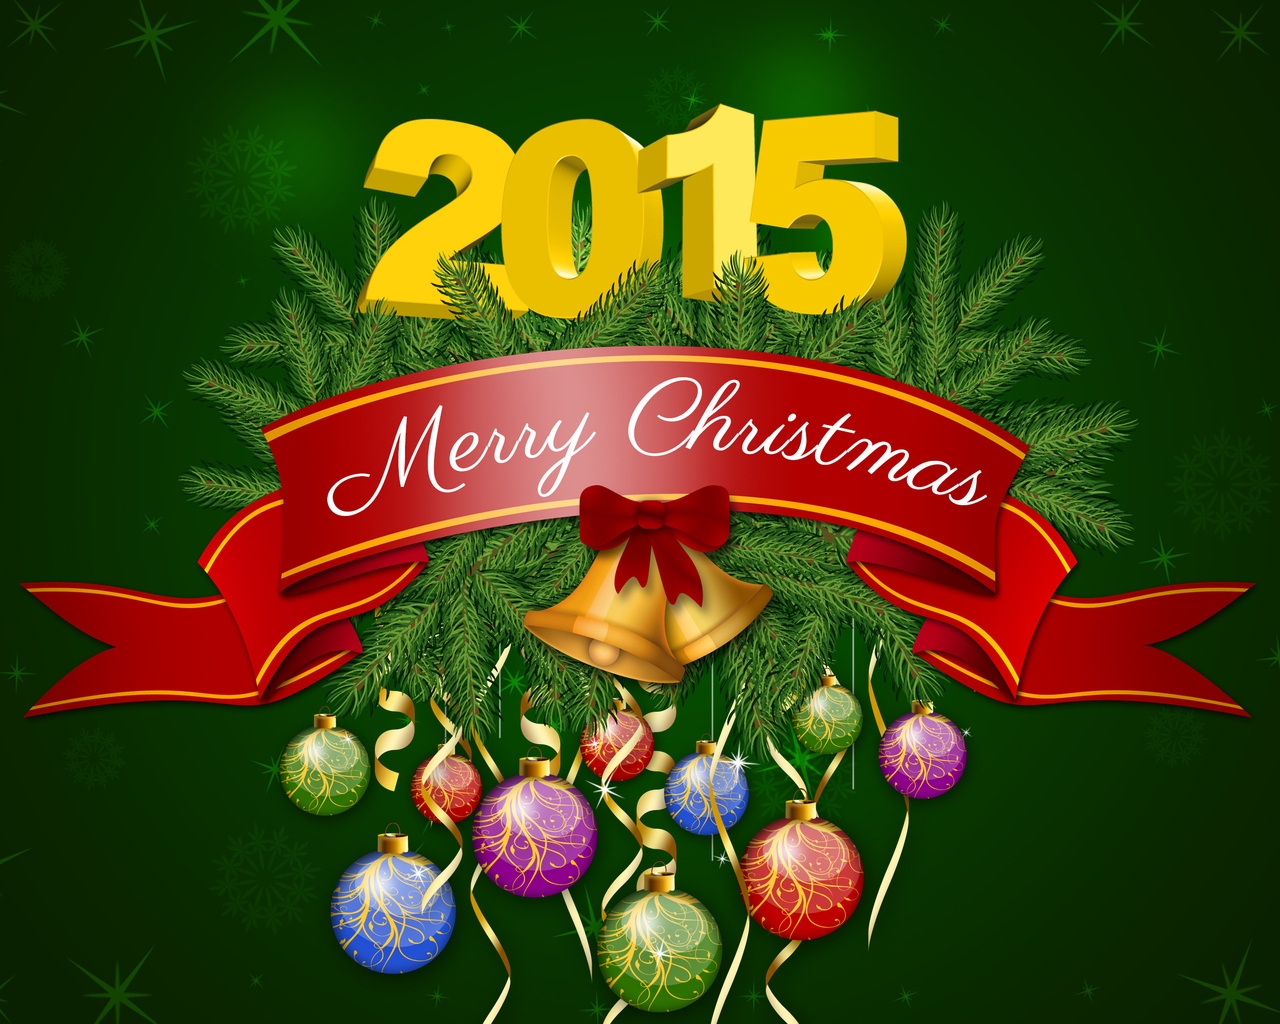 2014 Merry Christmas Poster for 1280 x 1024 resolution